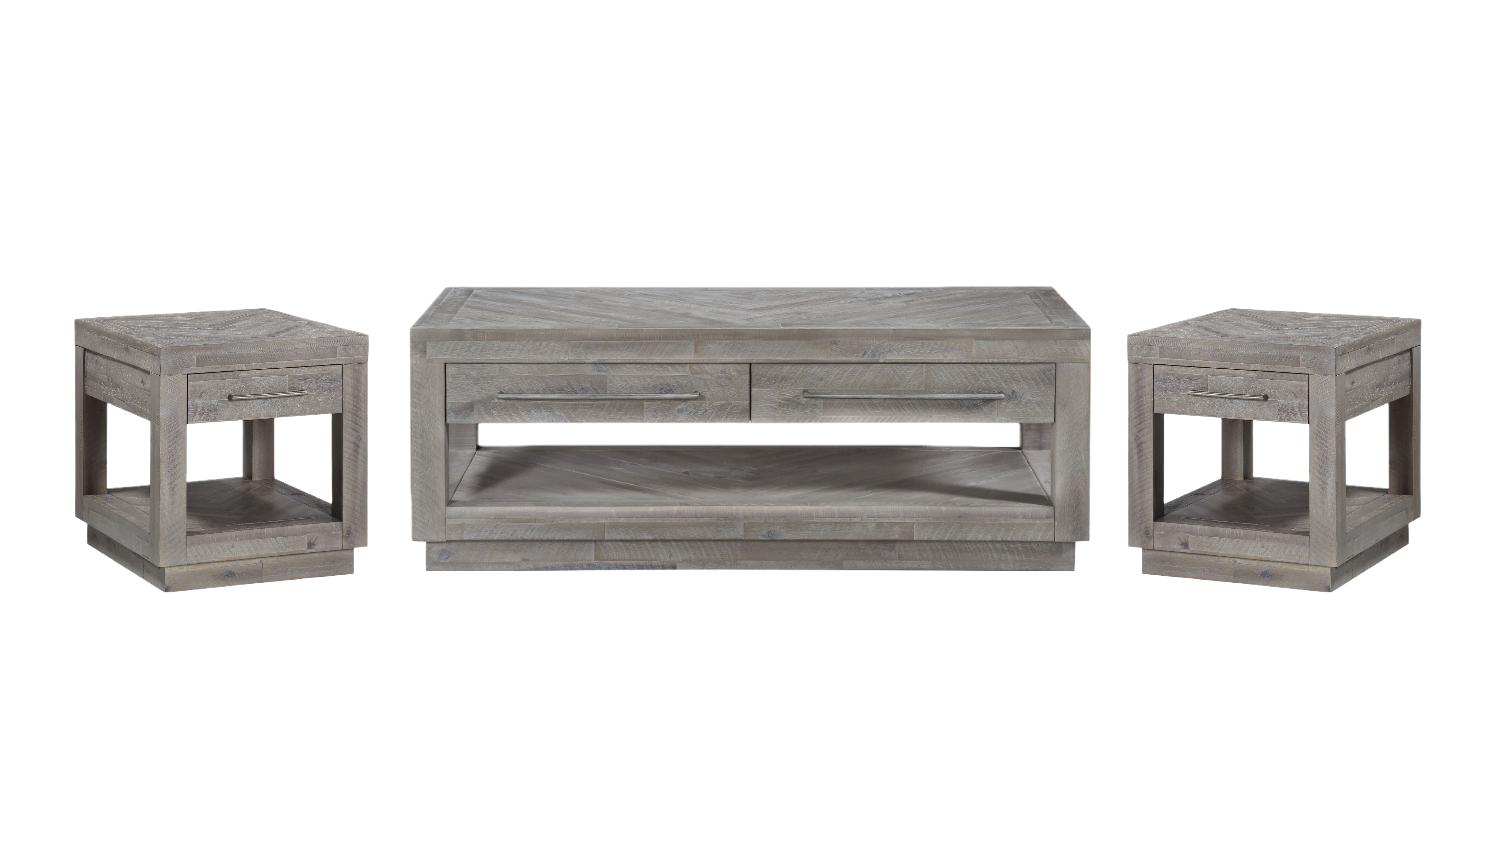 Traditional, Rustic Coffee Table and 2 End Tables Alexandra 5RS321-3pcs in Light Gray 